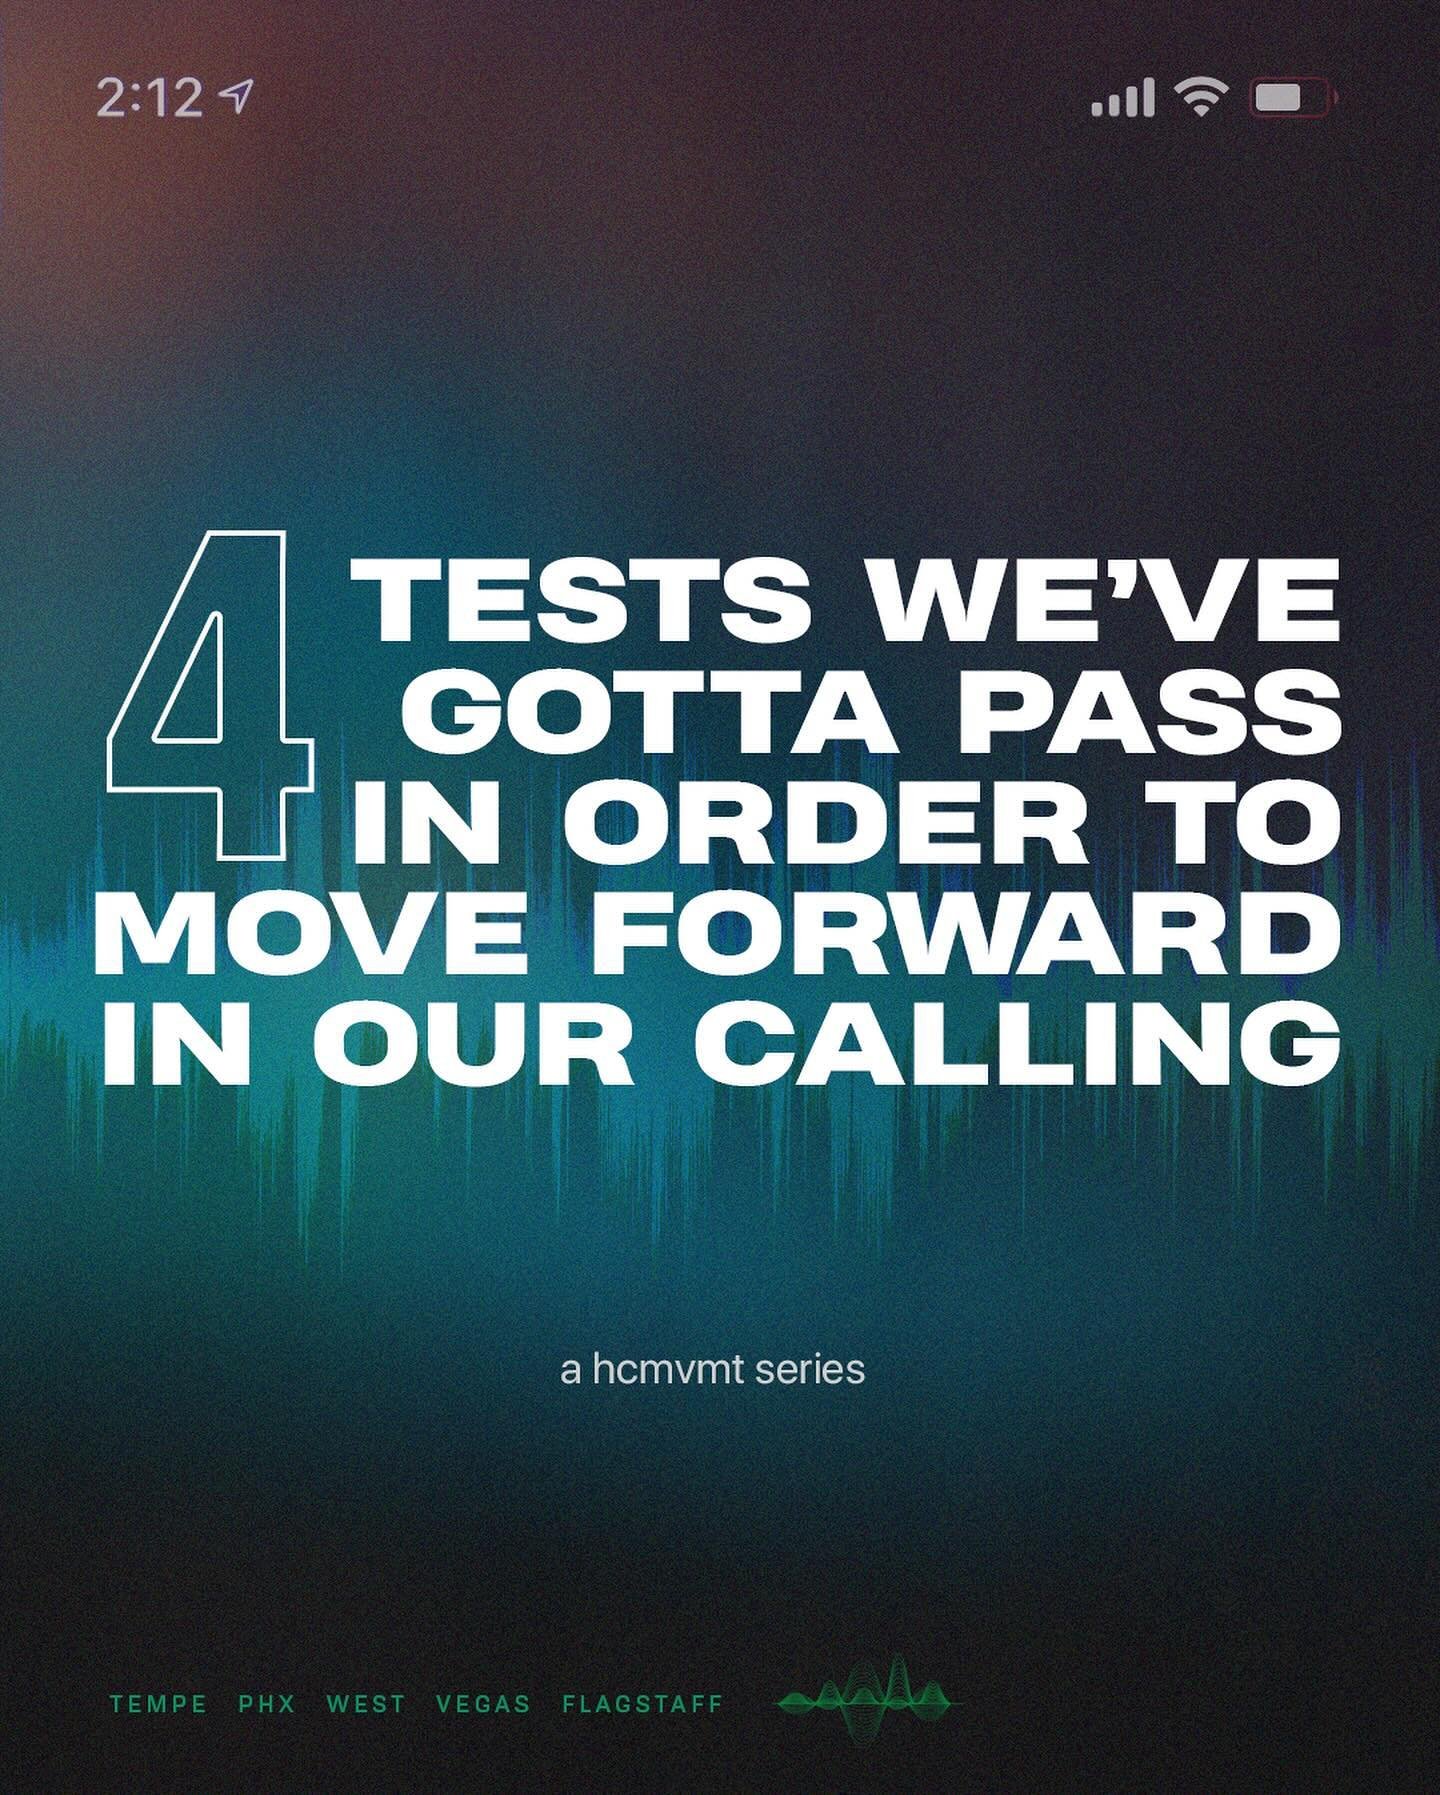 4 tests we&rsquo;ve gotta pass in order to move forward in our calling ☝️🔥

#battletobelong #gcu #tuscon #hopechurchmvmt #CalledbyGod #vegas #phoenix #faith #college